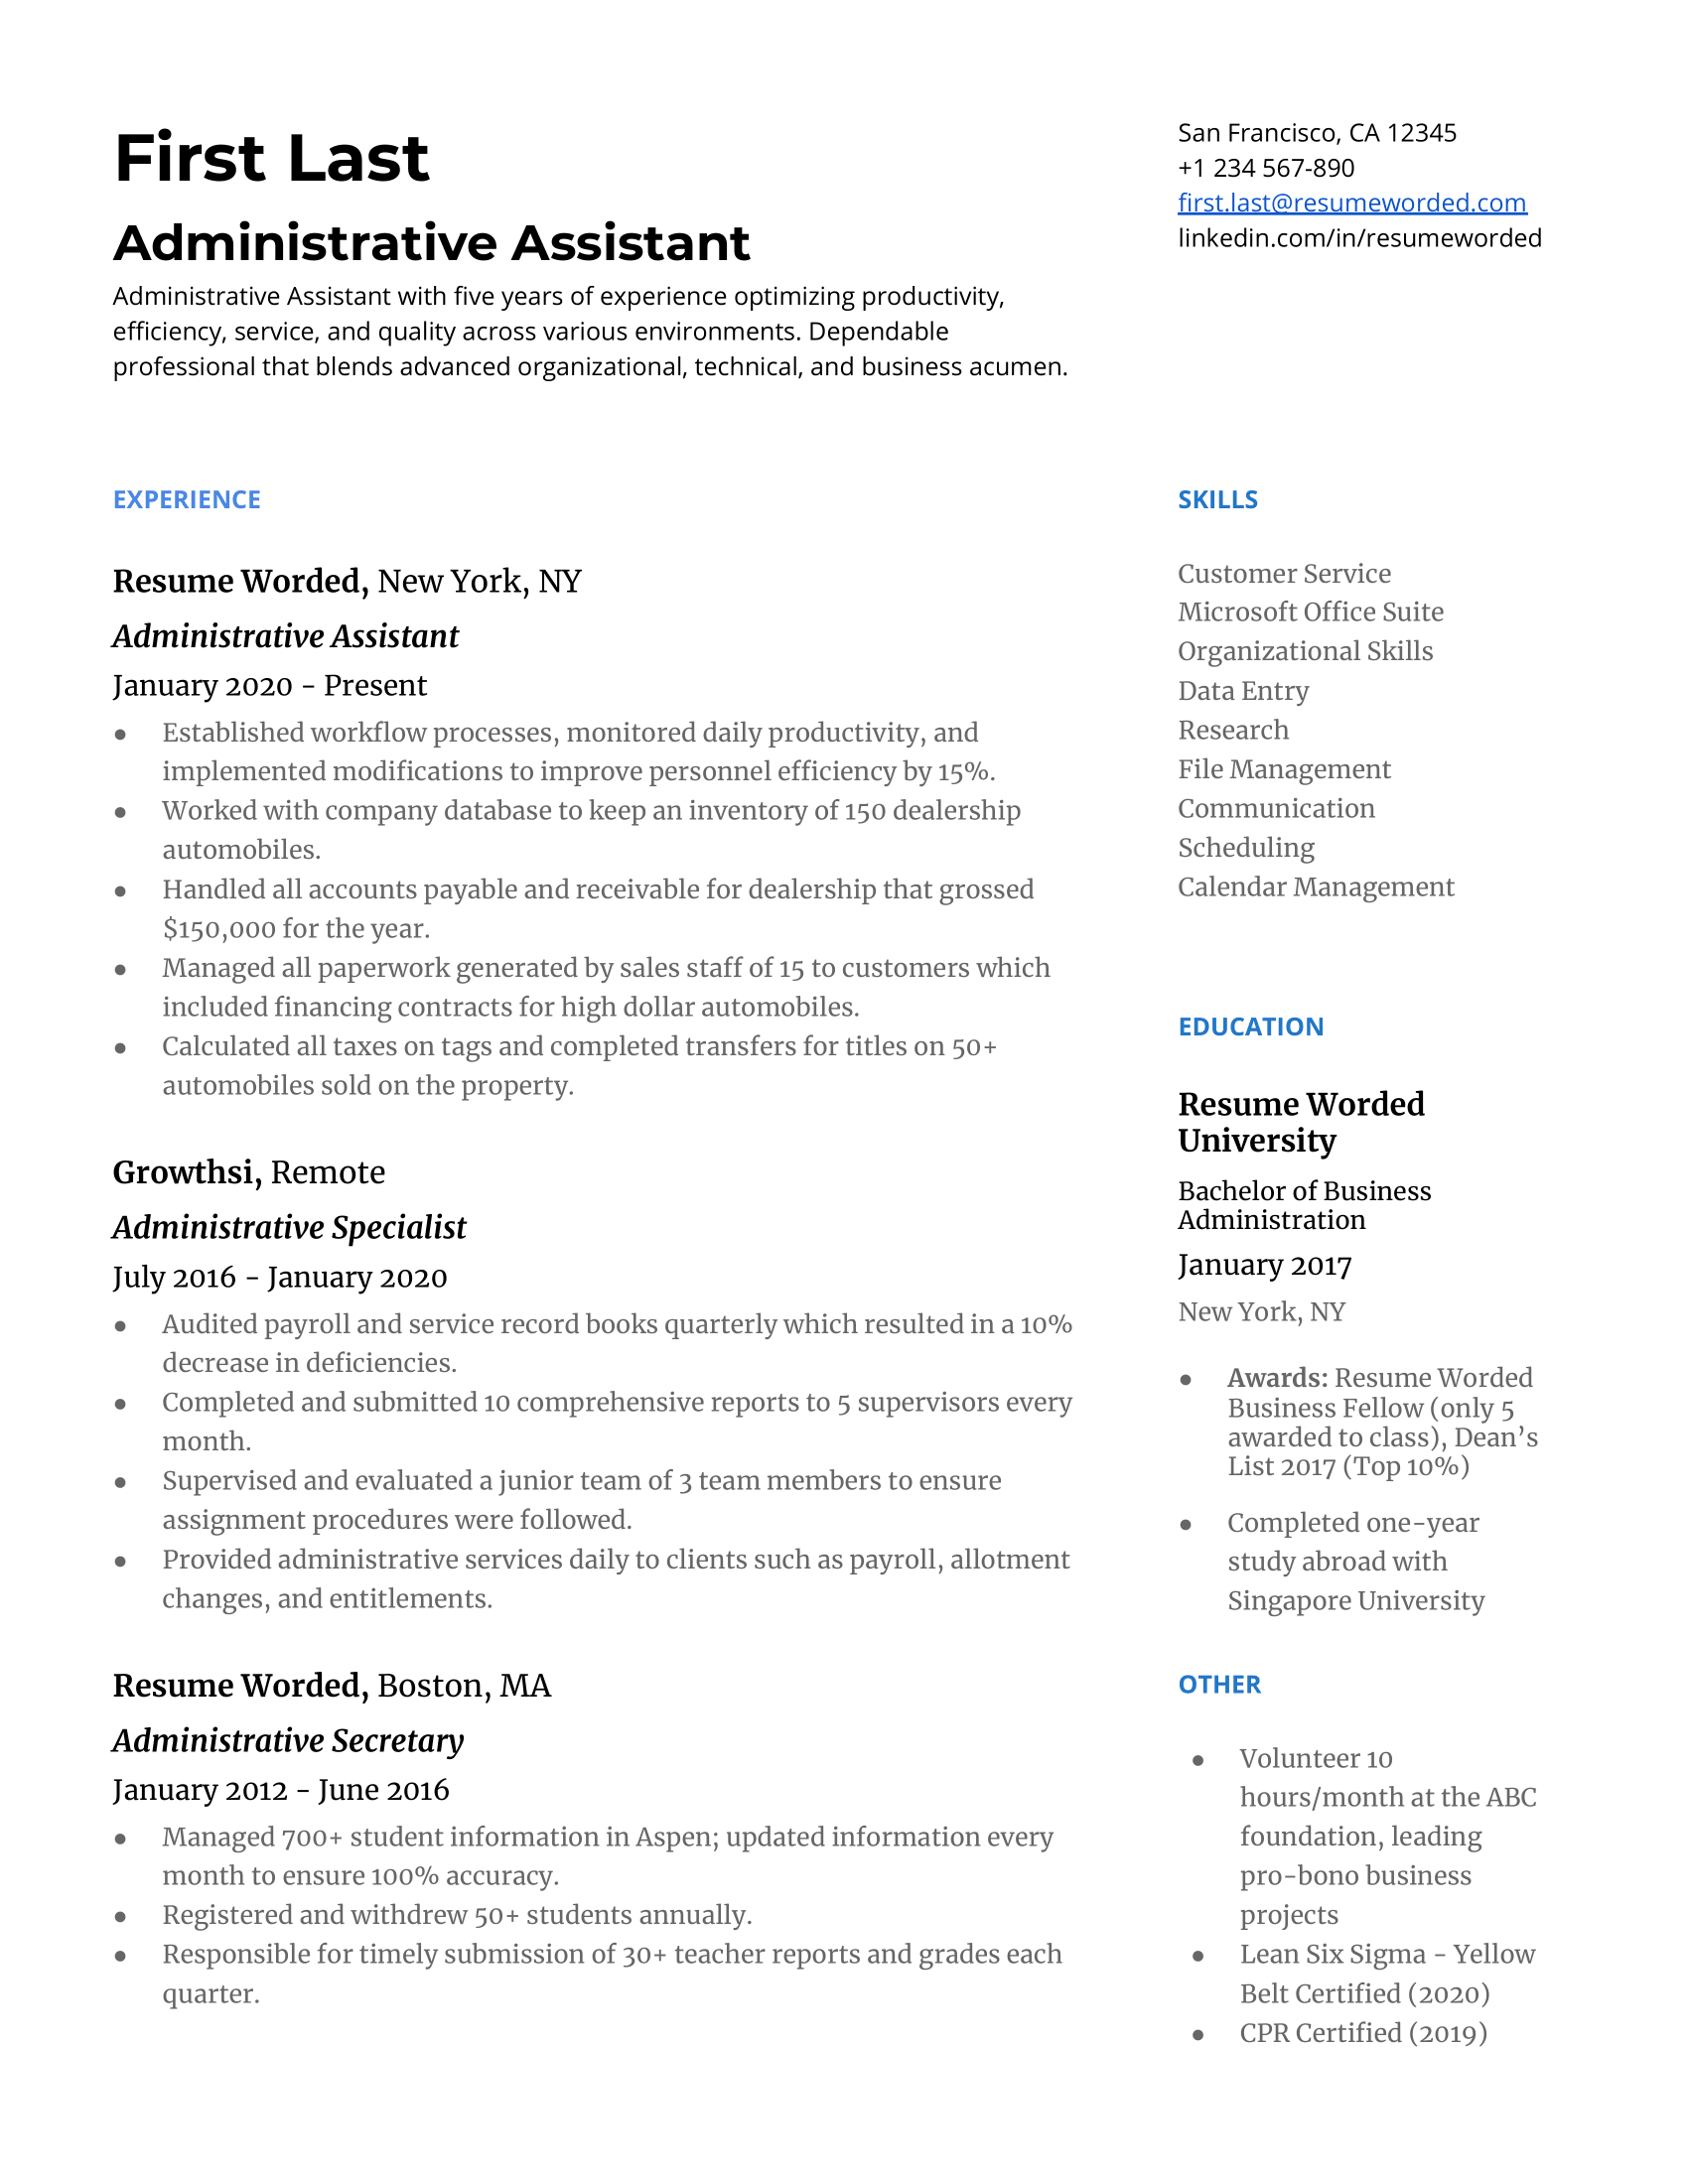 Top 3 Ways To Buy A Used resume